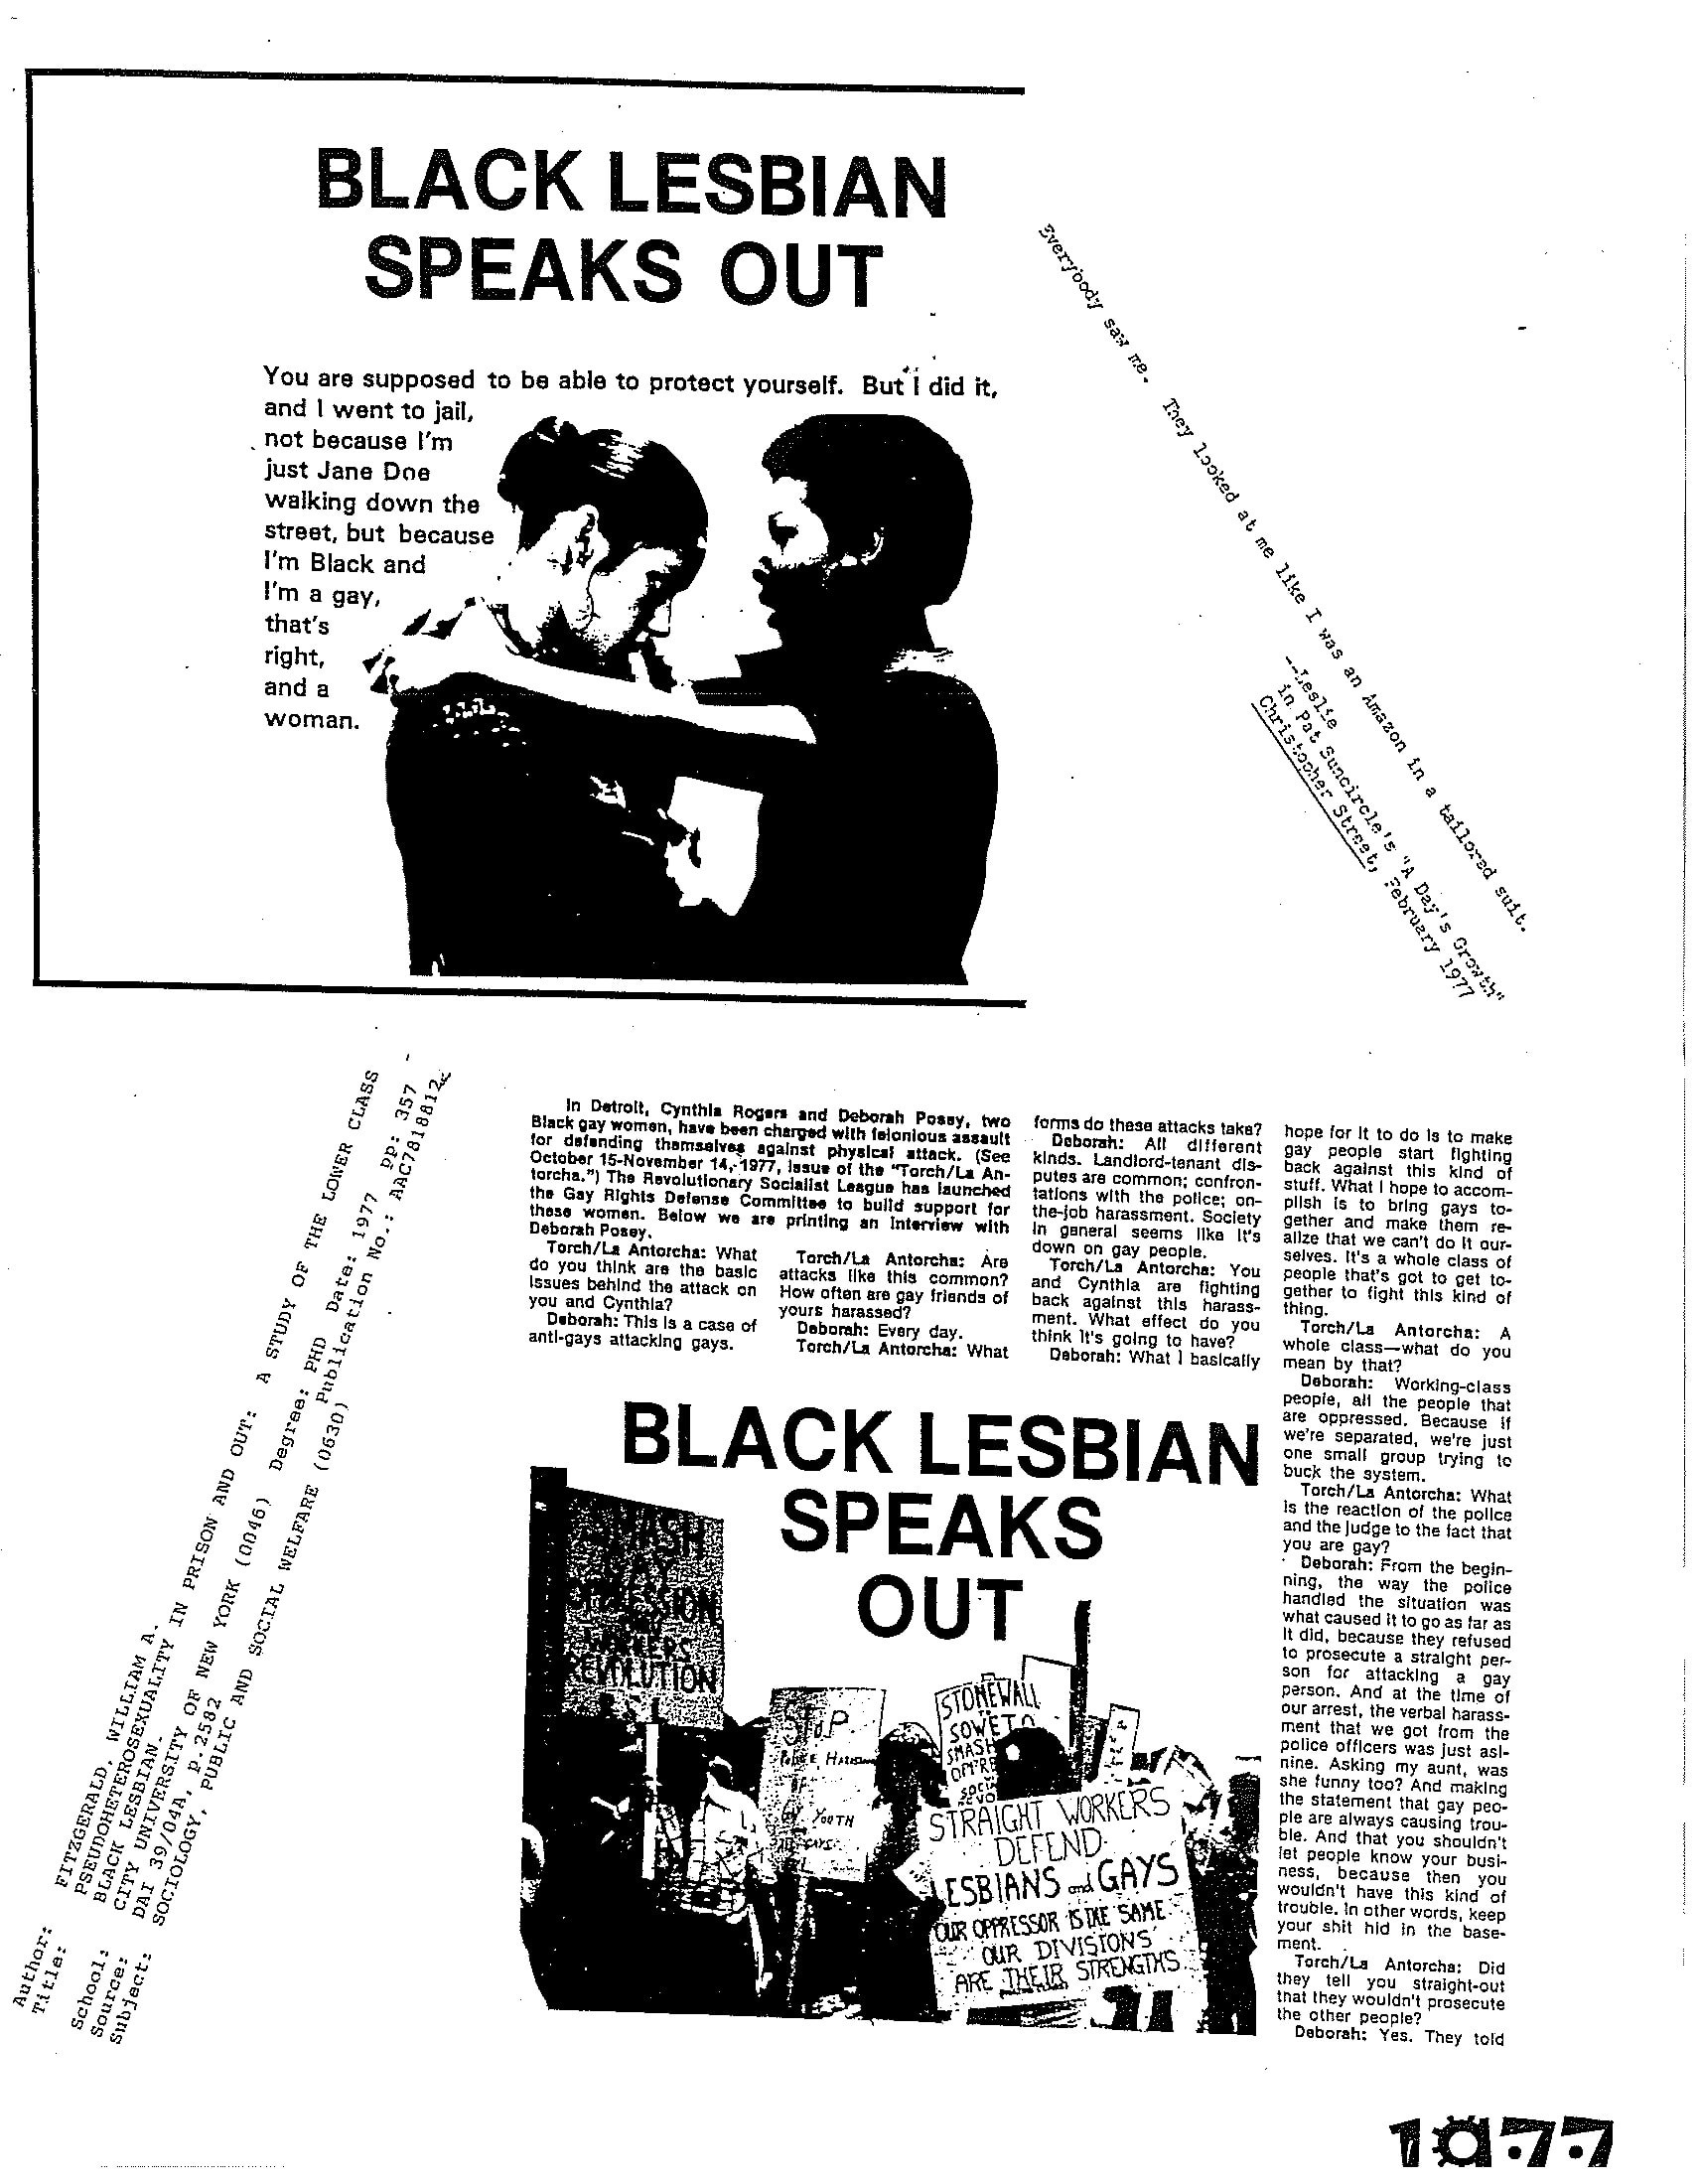 Black Lesbians In The 70 S And Before An At Home Tour At The Lesbian Herstory Archives The